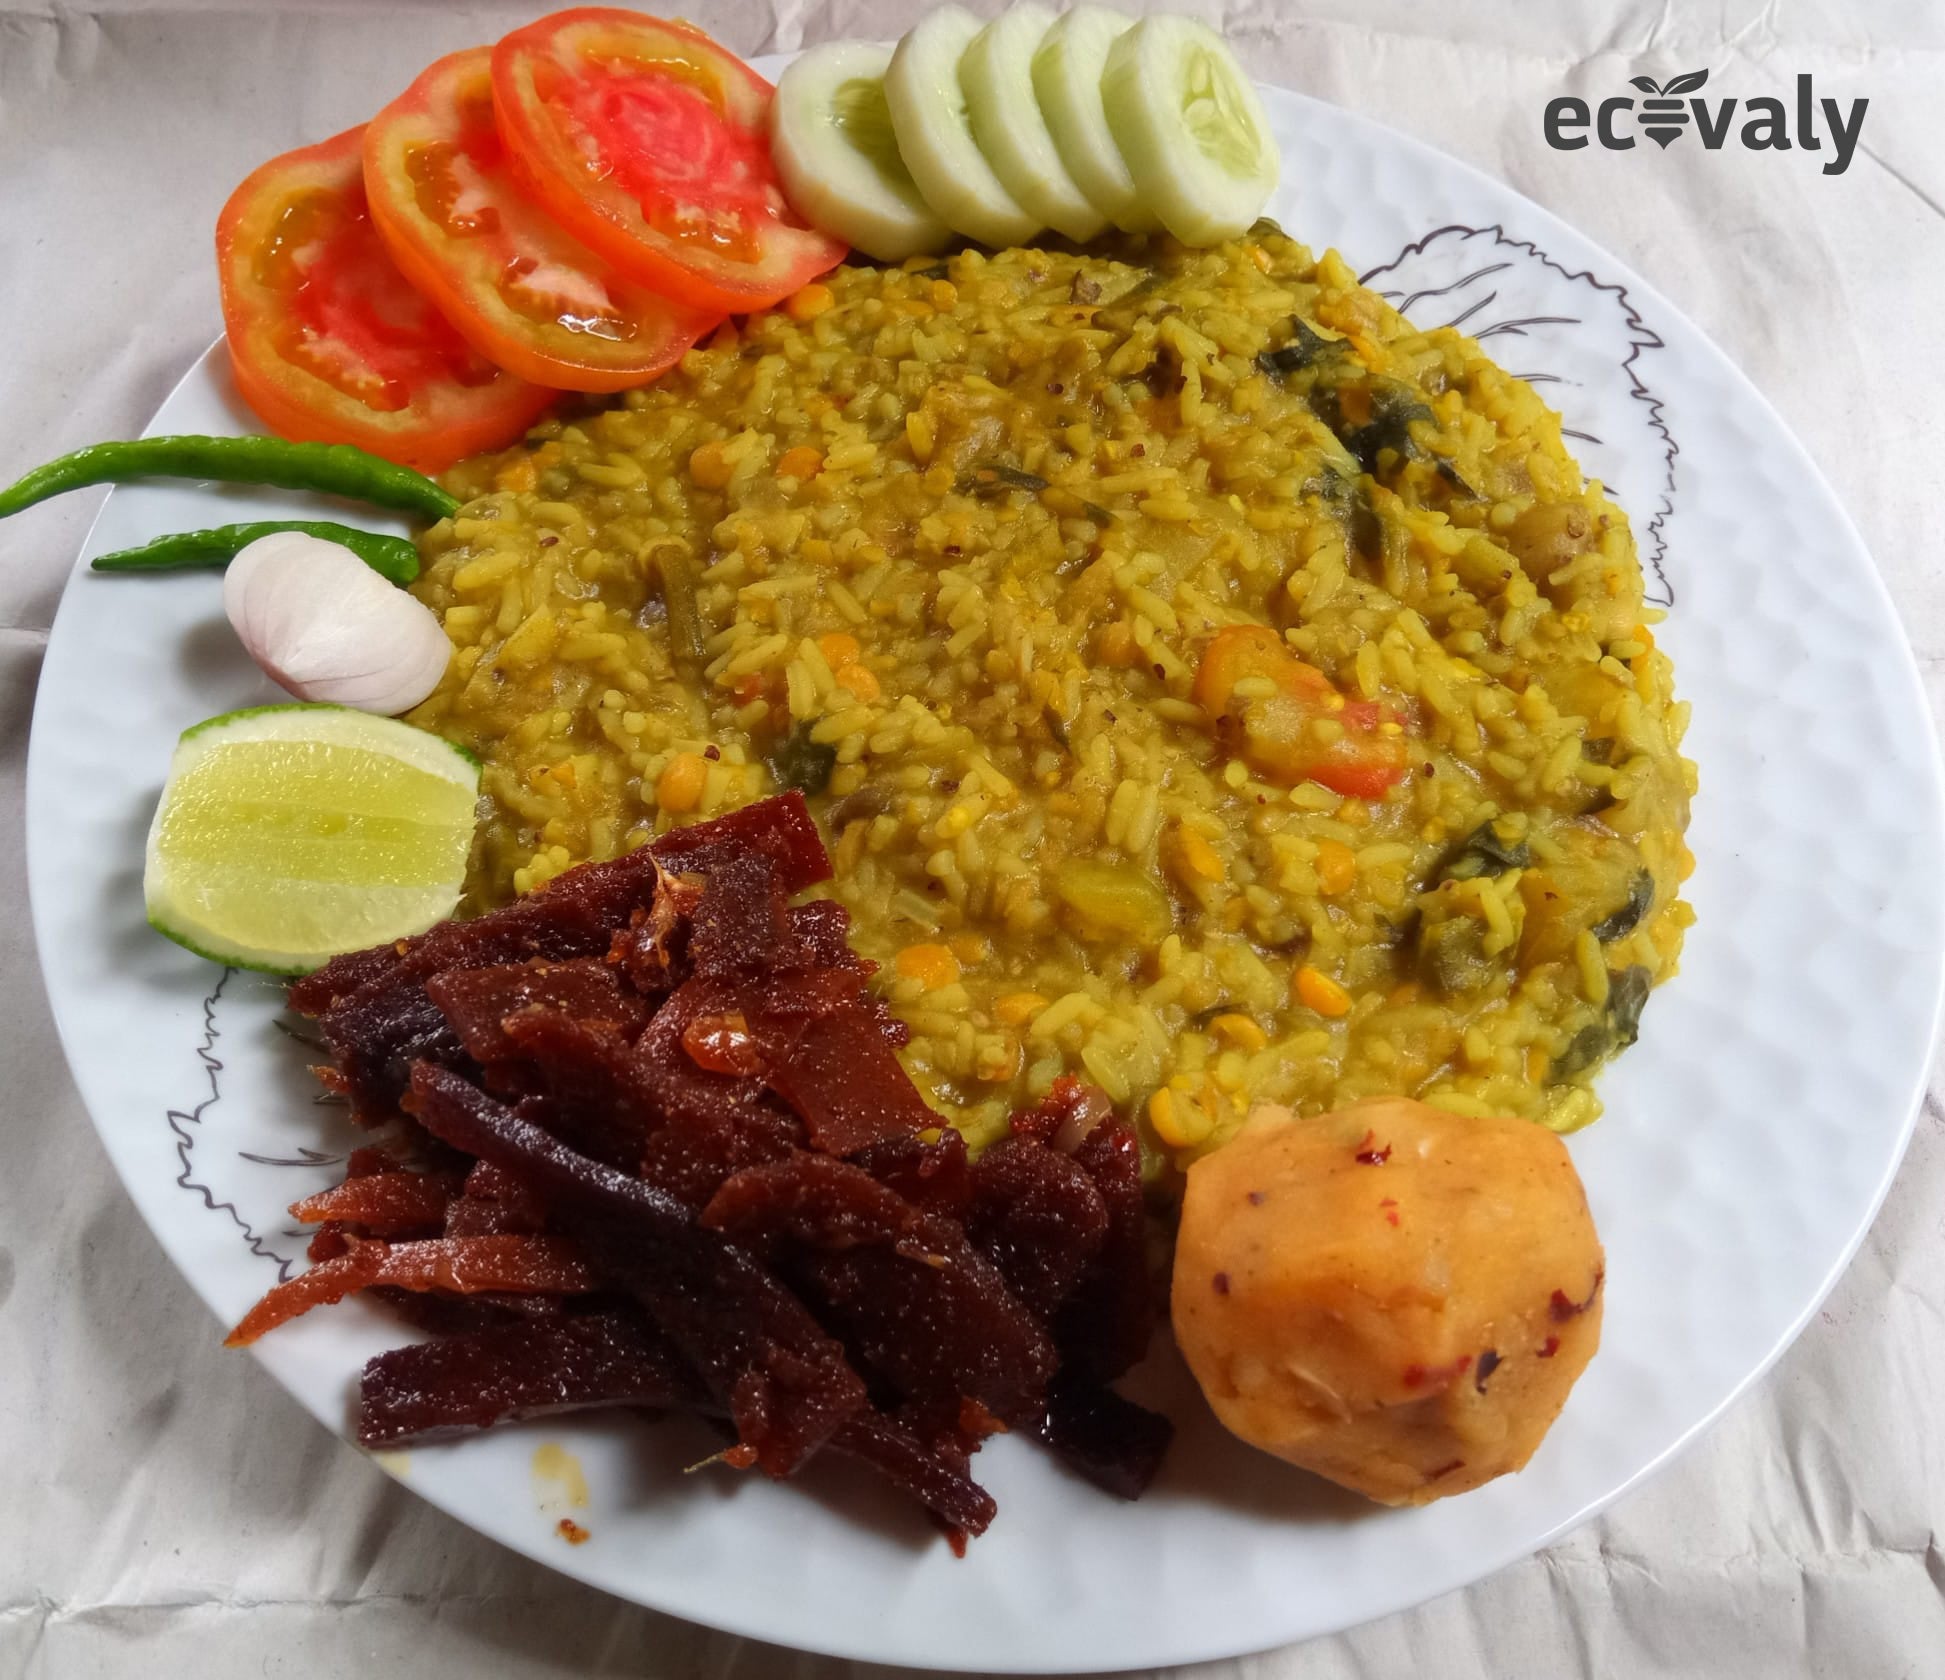 Ecovaly Premive Amsotto Achar- আমসত্ত্বের আচার